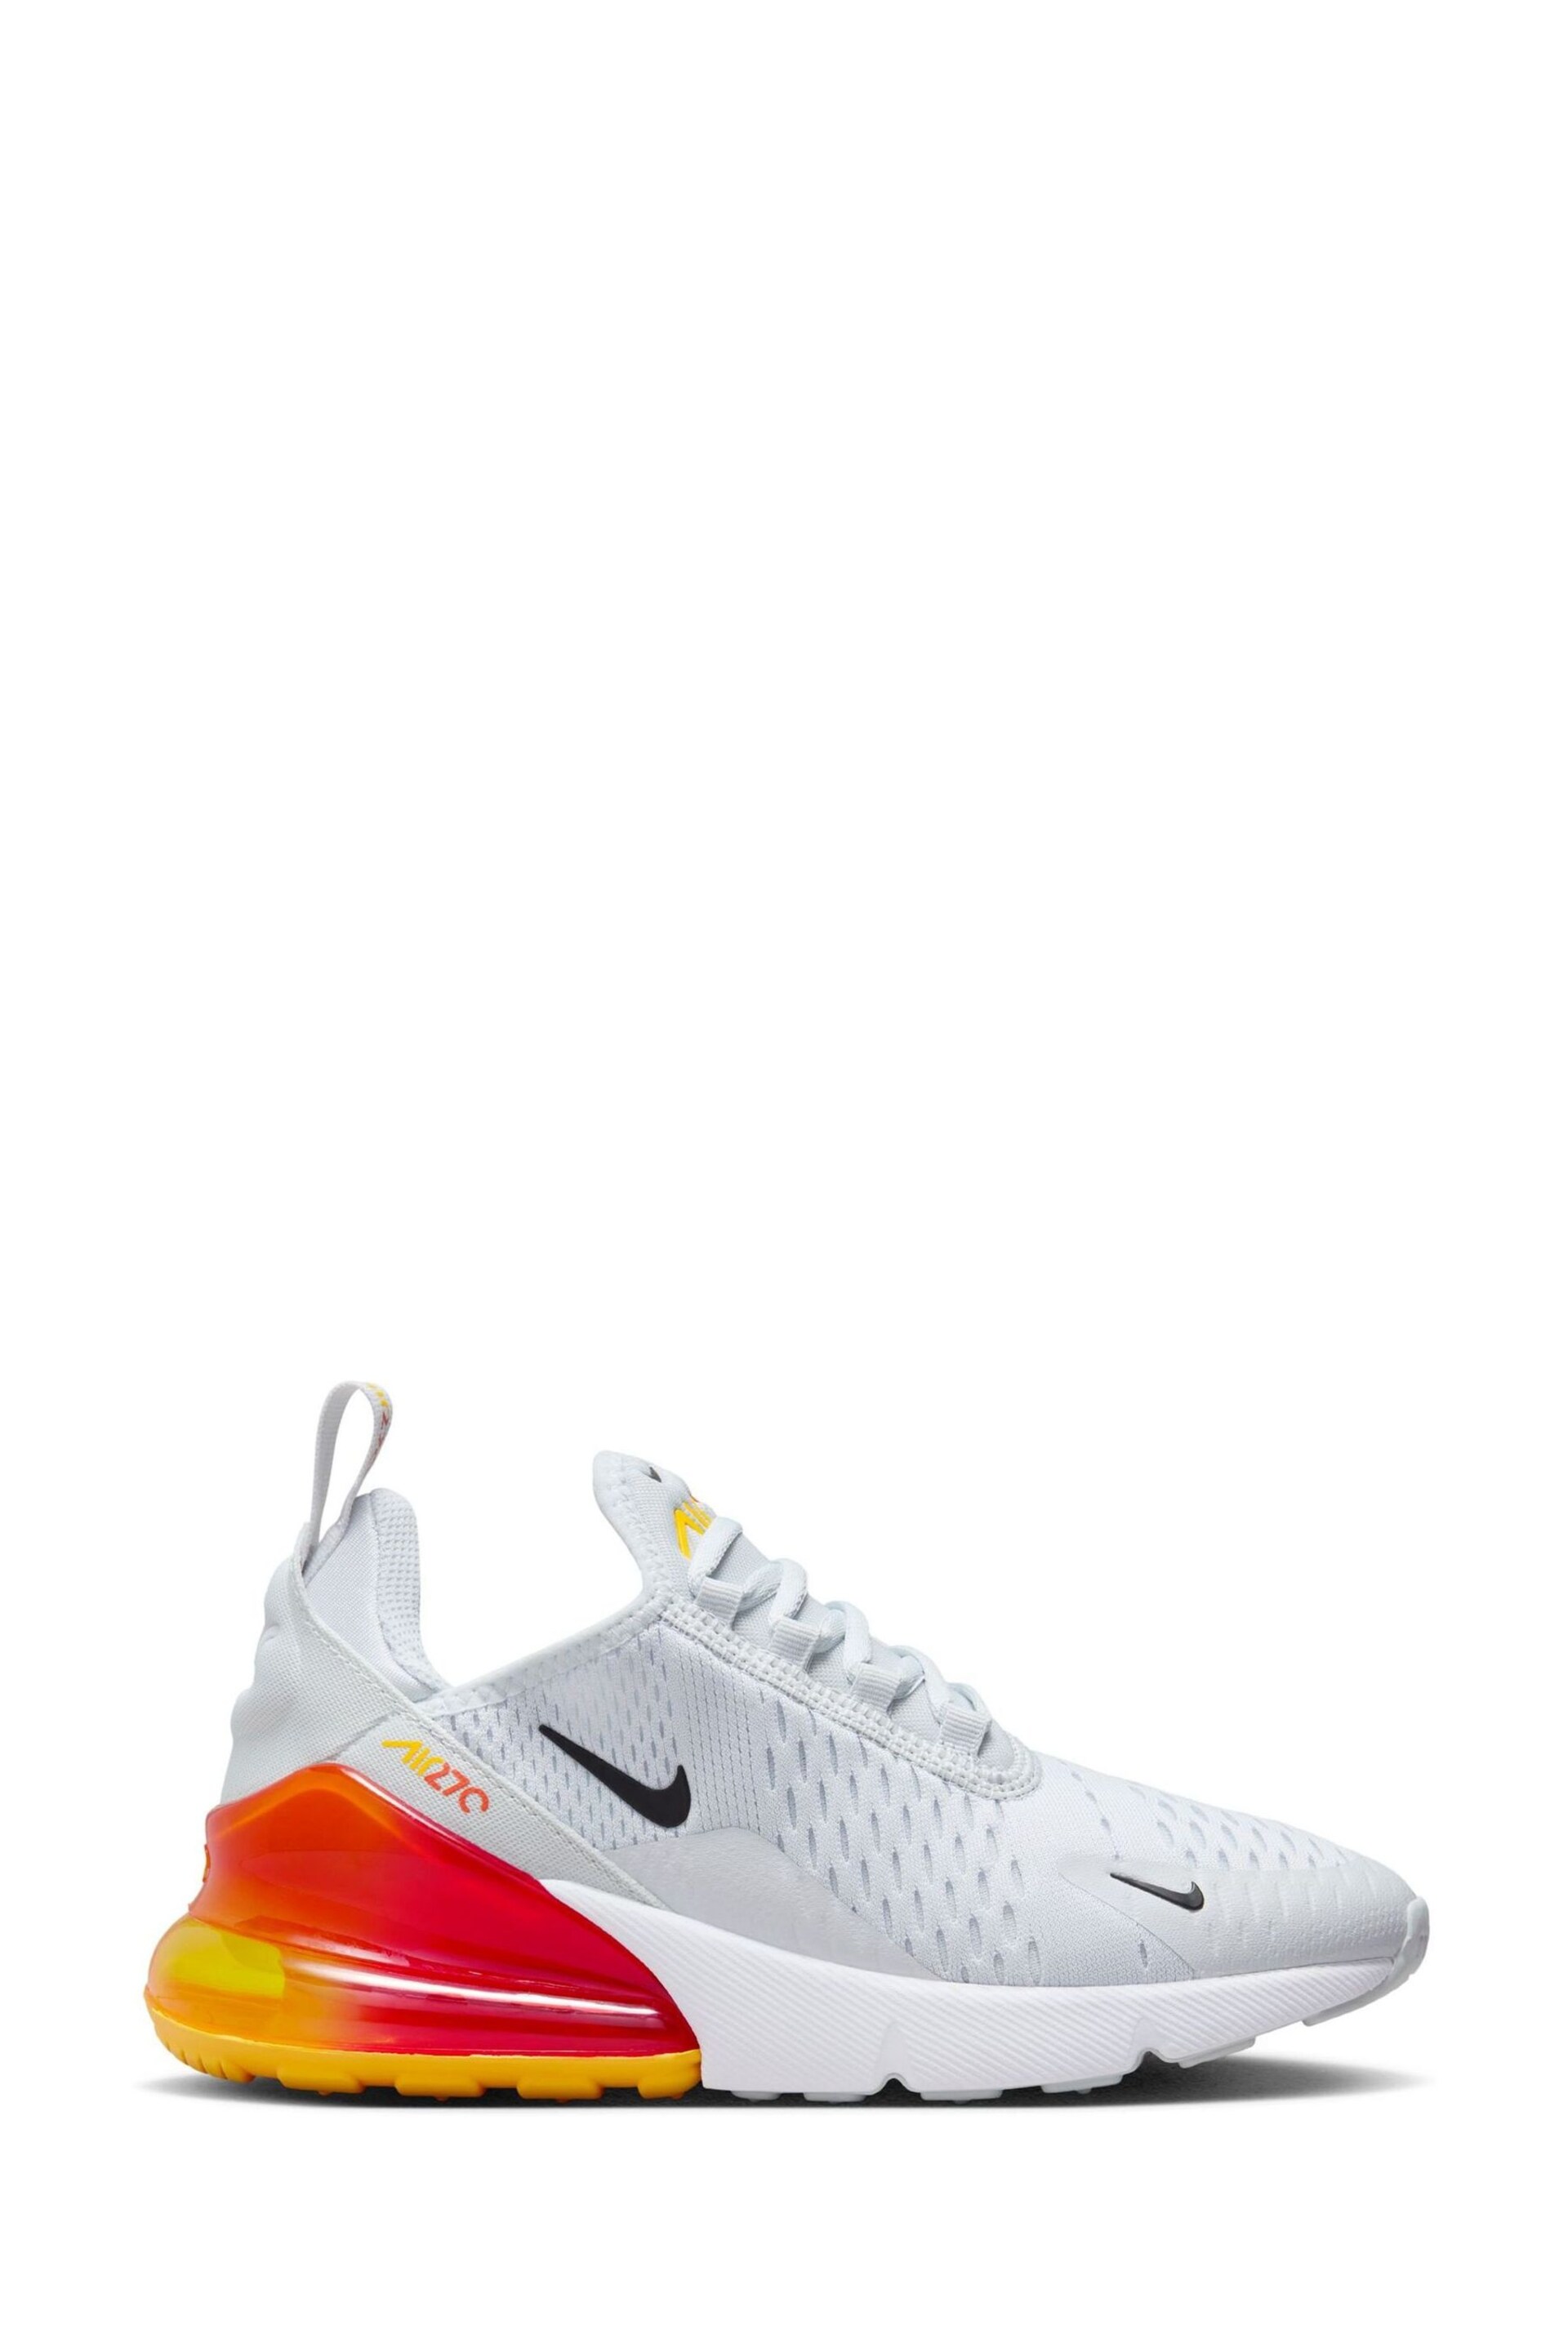 Nike Grey/Orange Air Max 270 Youth Trainers - Image 1 of 8